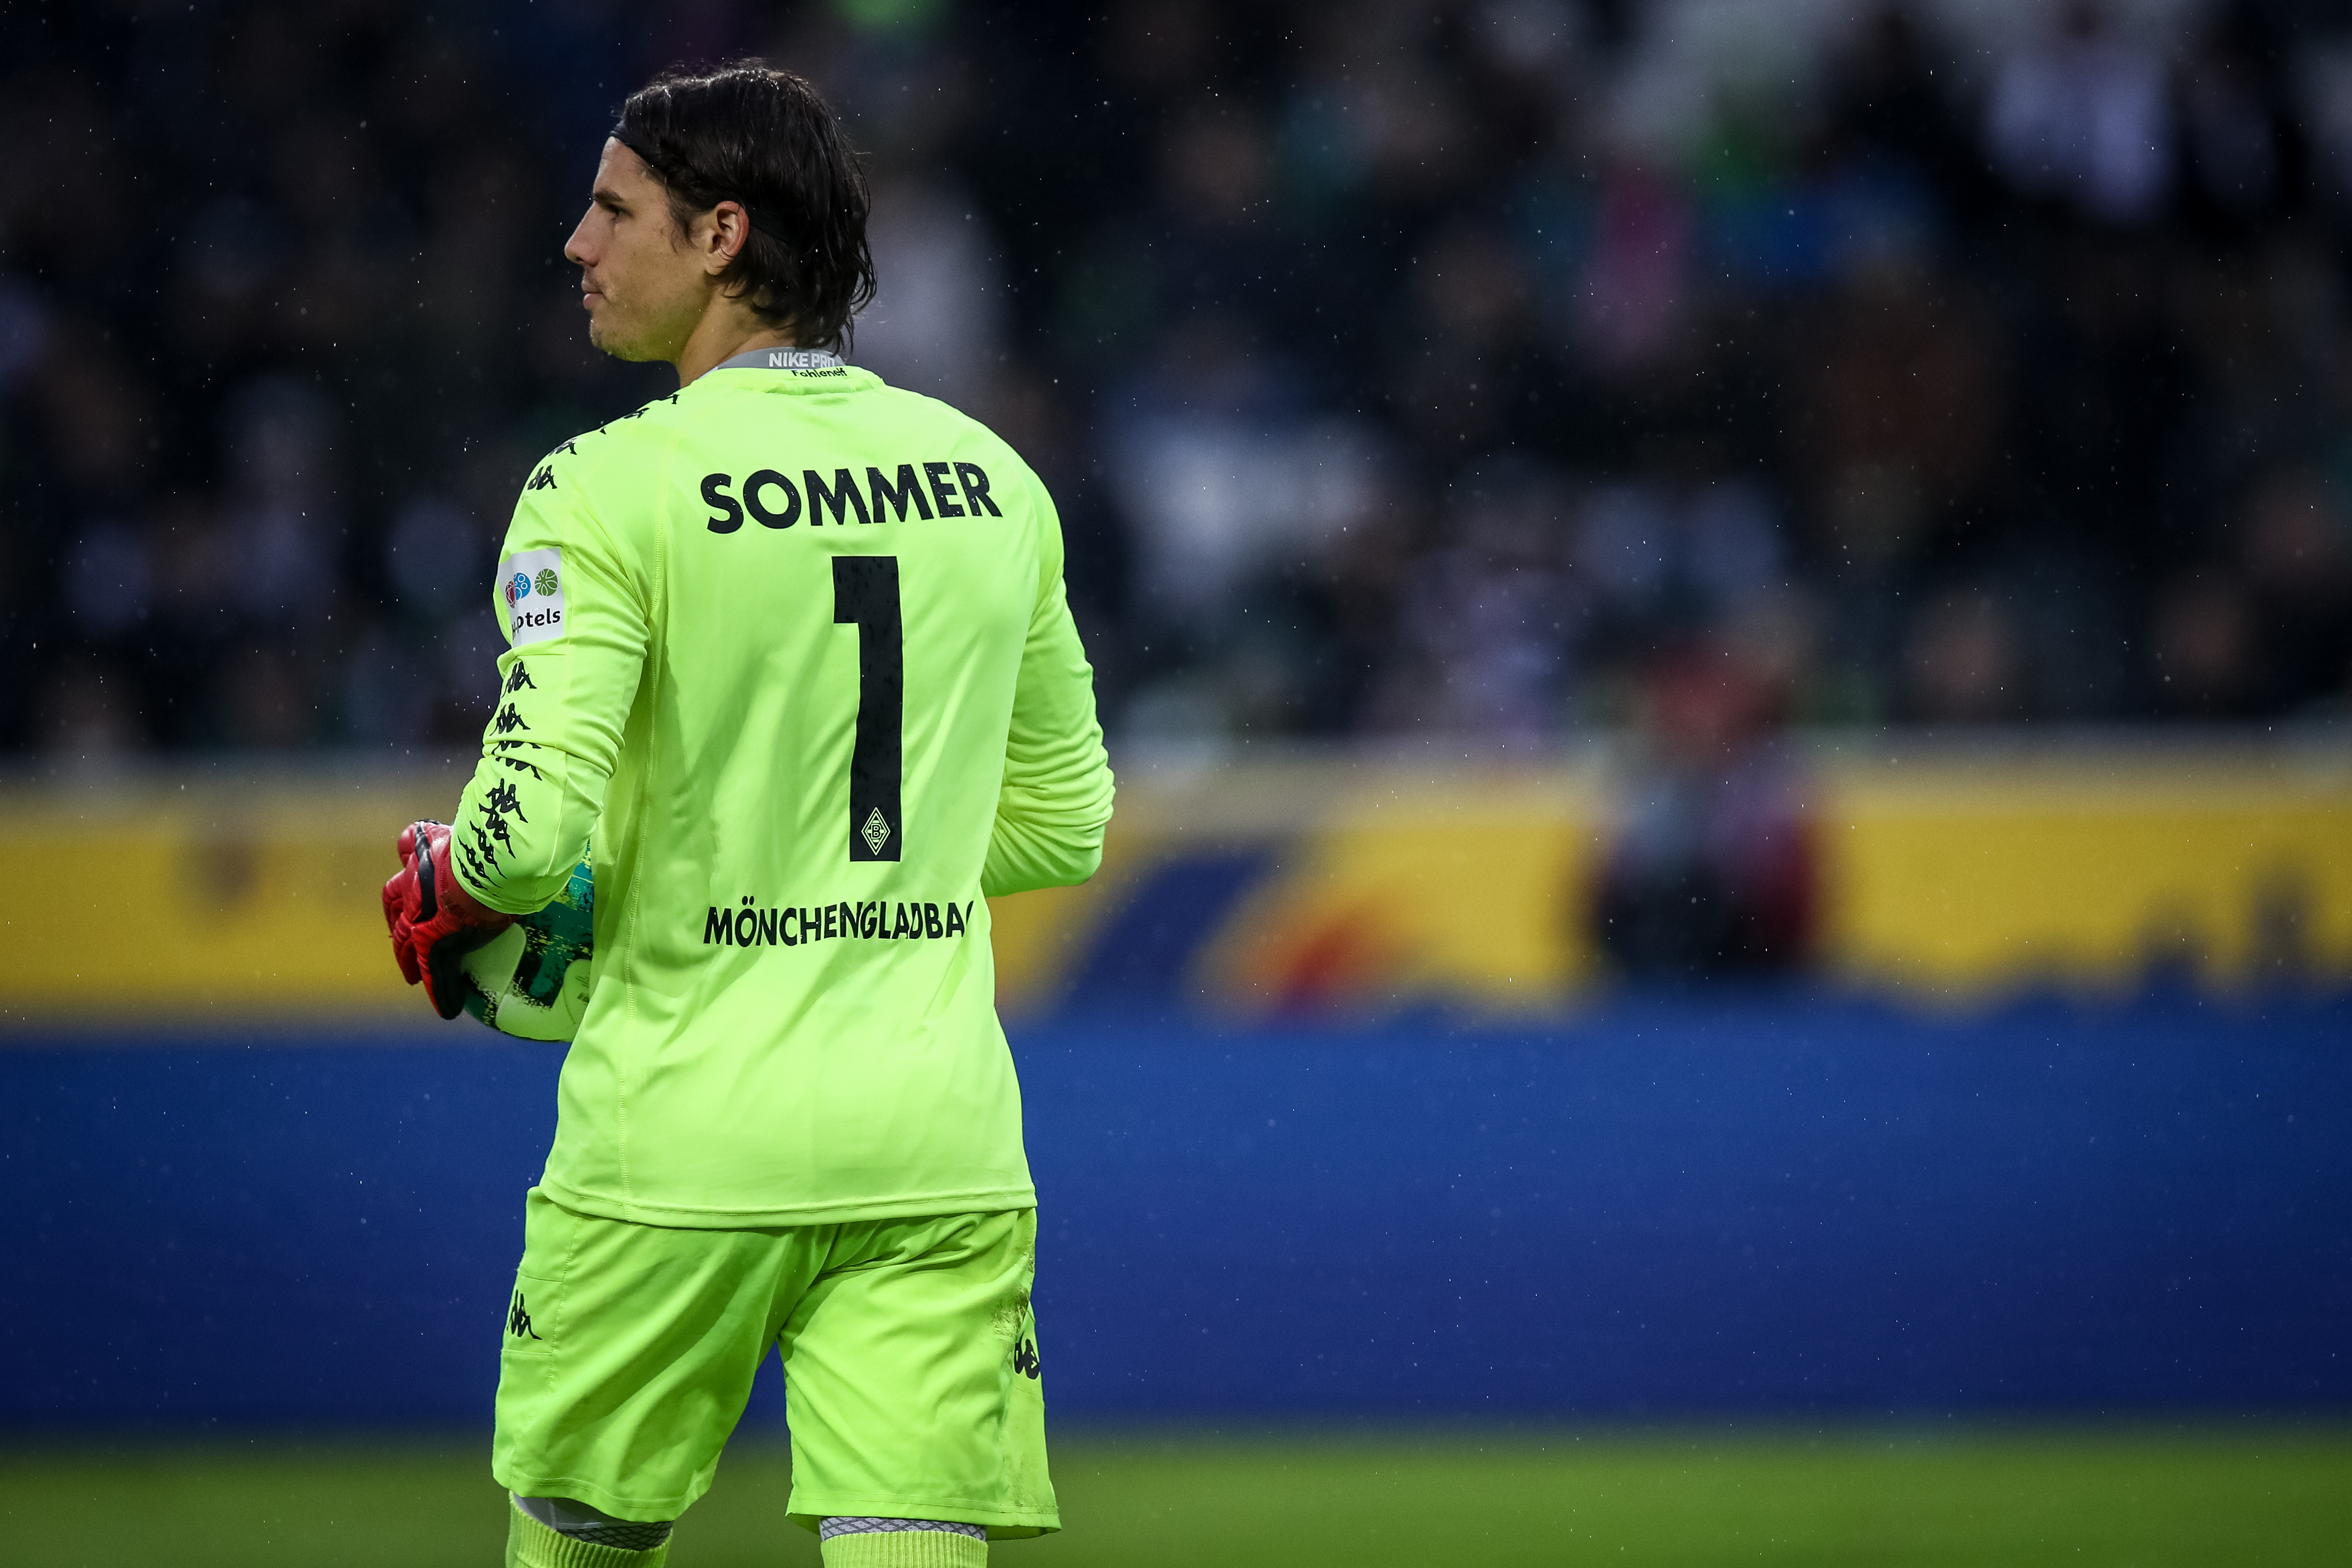 Gladbach have the excellent Yann Sommer in goal. (Photo by Maja Hitij/Bongarts/Getty Images)